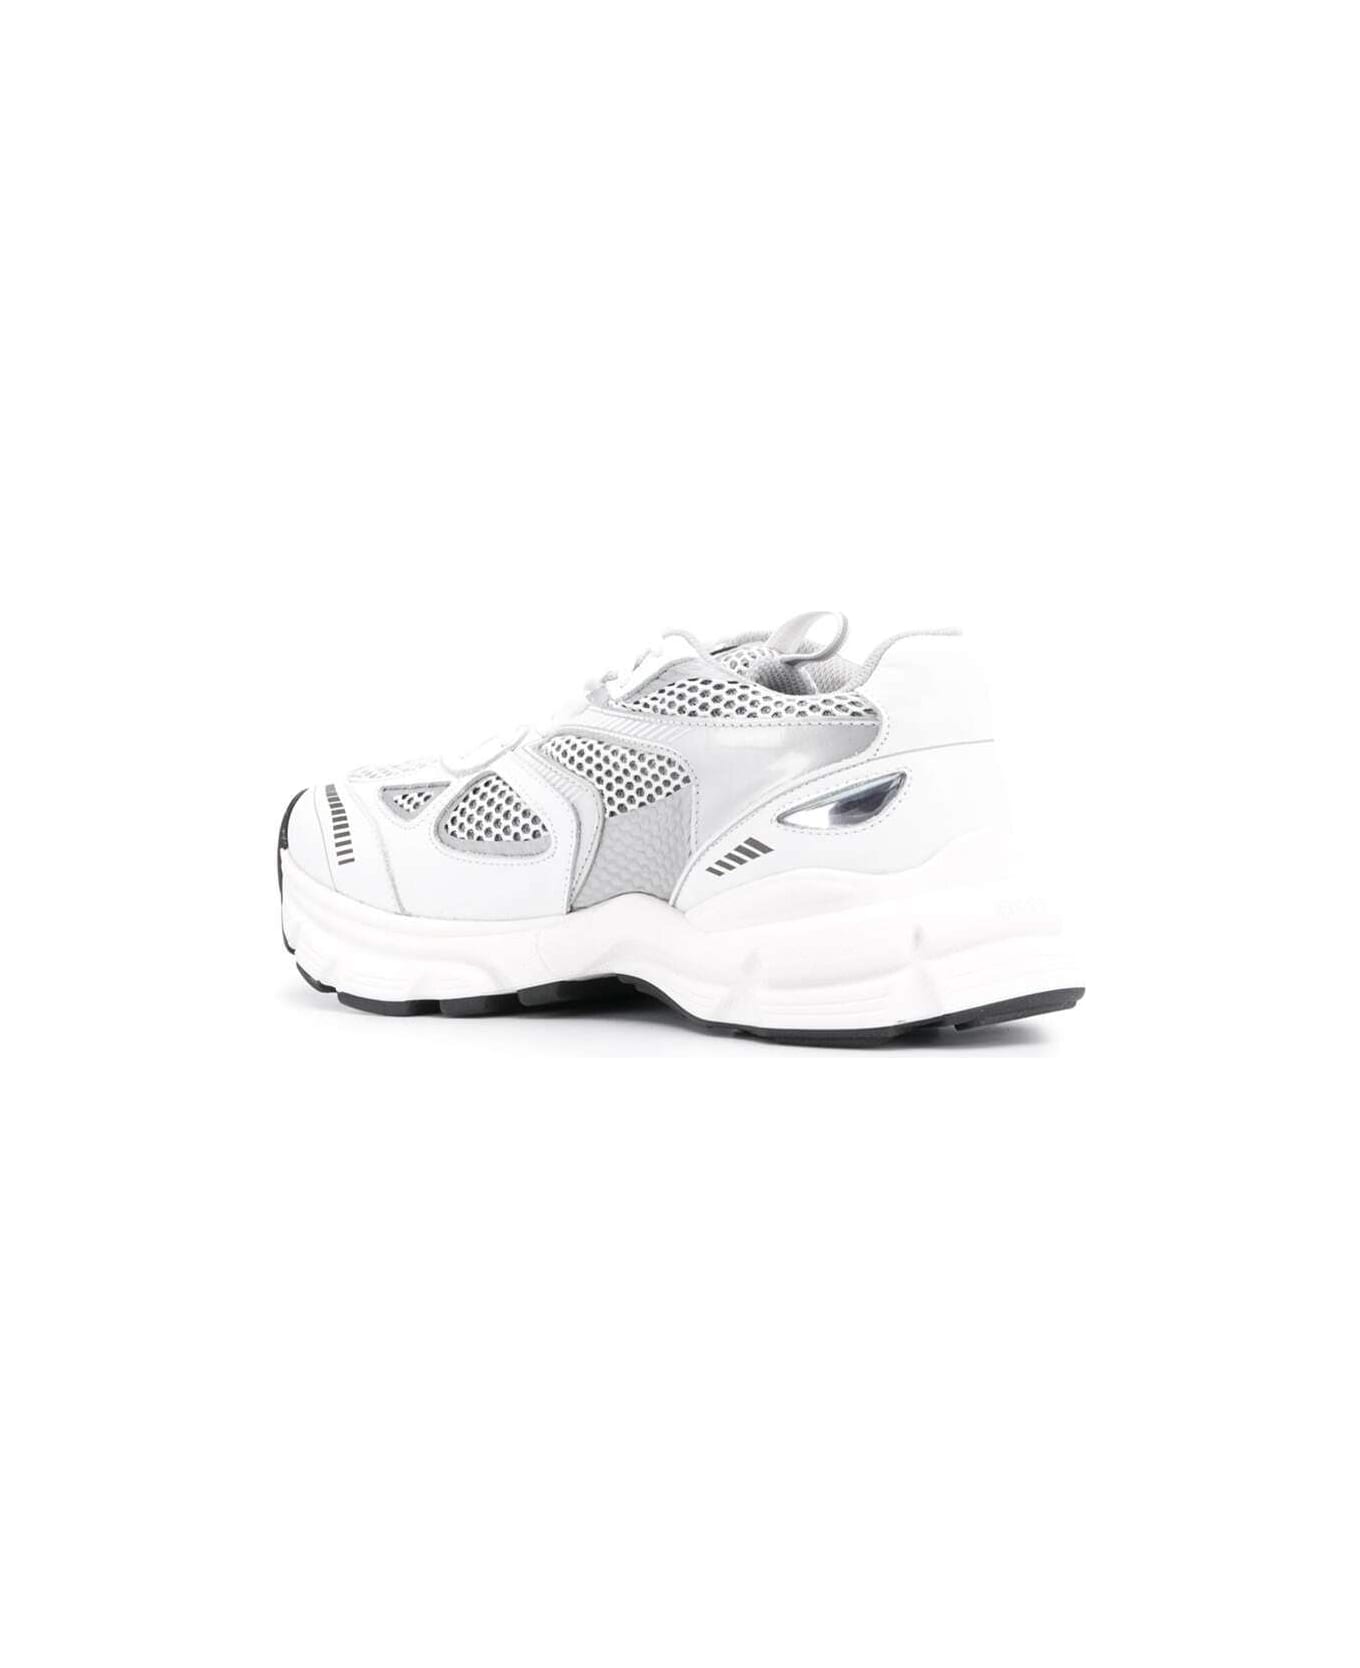 Axel Arigato Marathon Runner Recycled Rubber And Leather Sneakers Axel Arigato Woman - White スニーカー